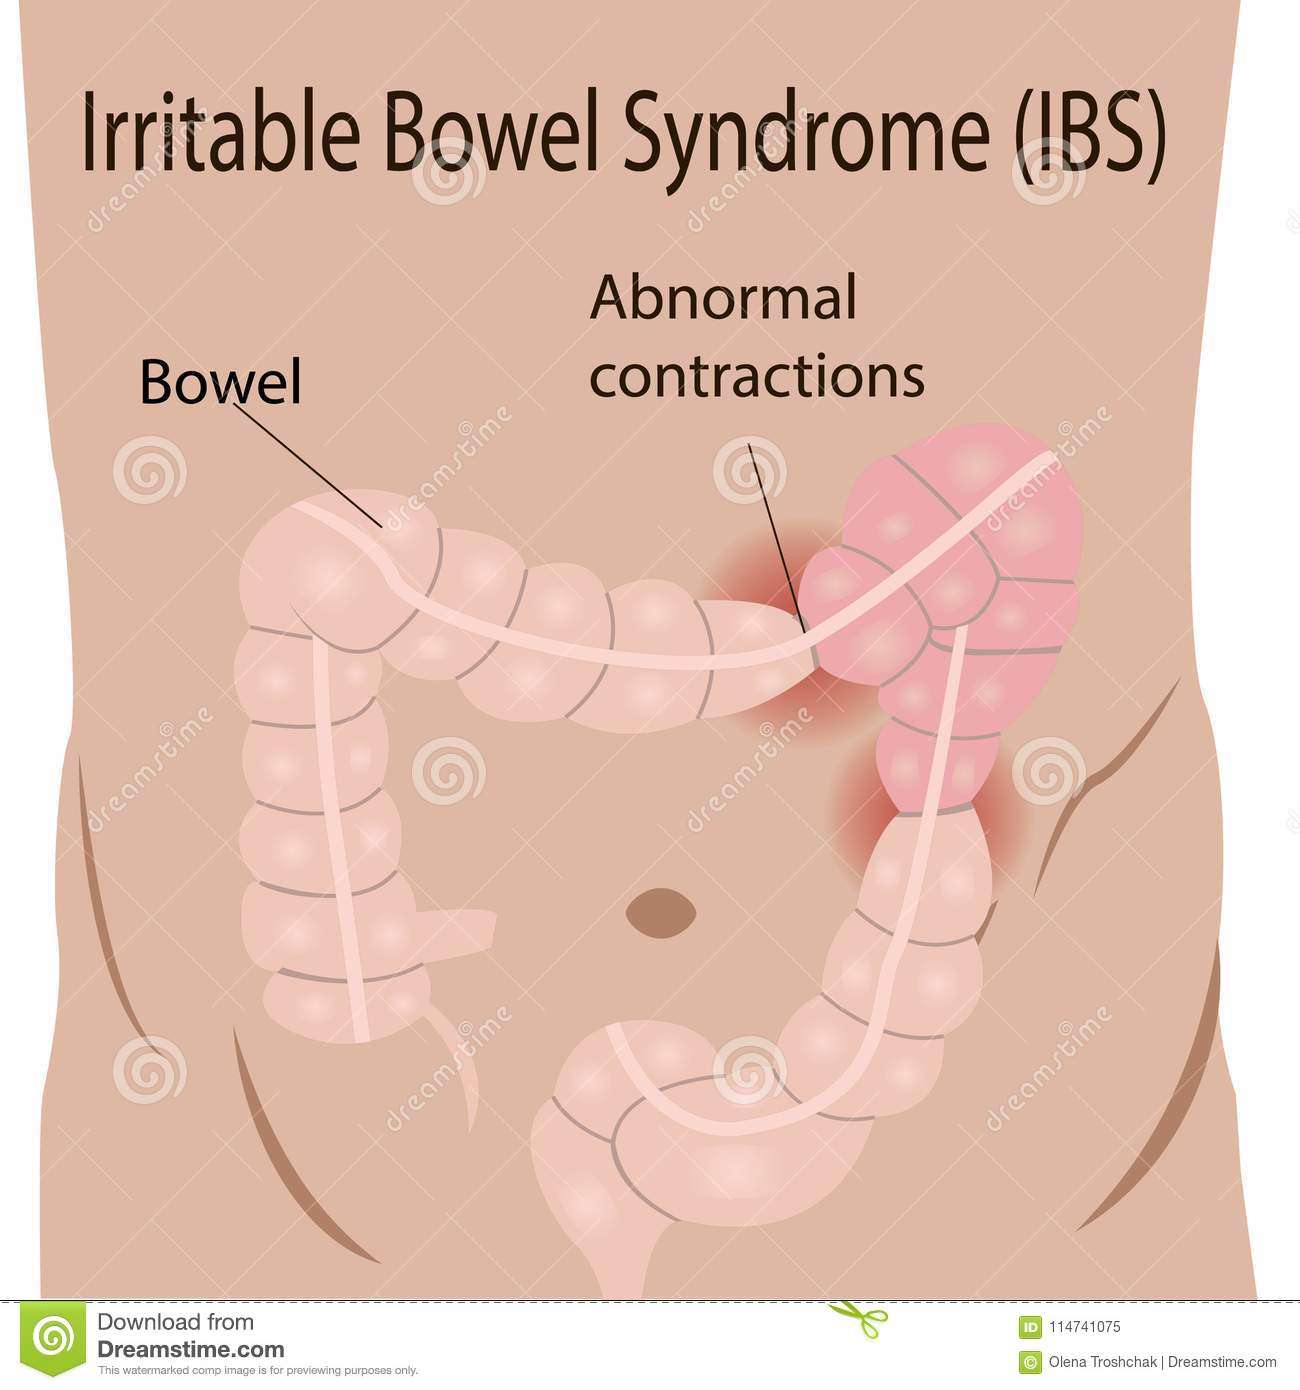 Irritable Bowel Syndrome IBS In A Large Intestine Stock Vector ...